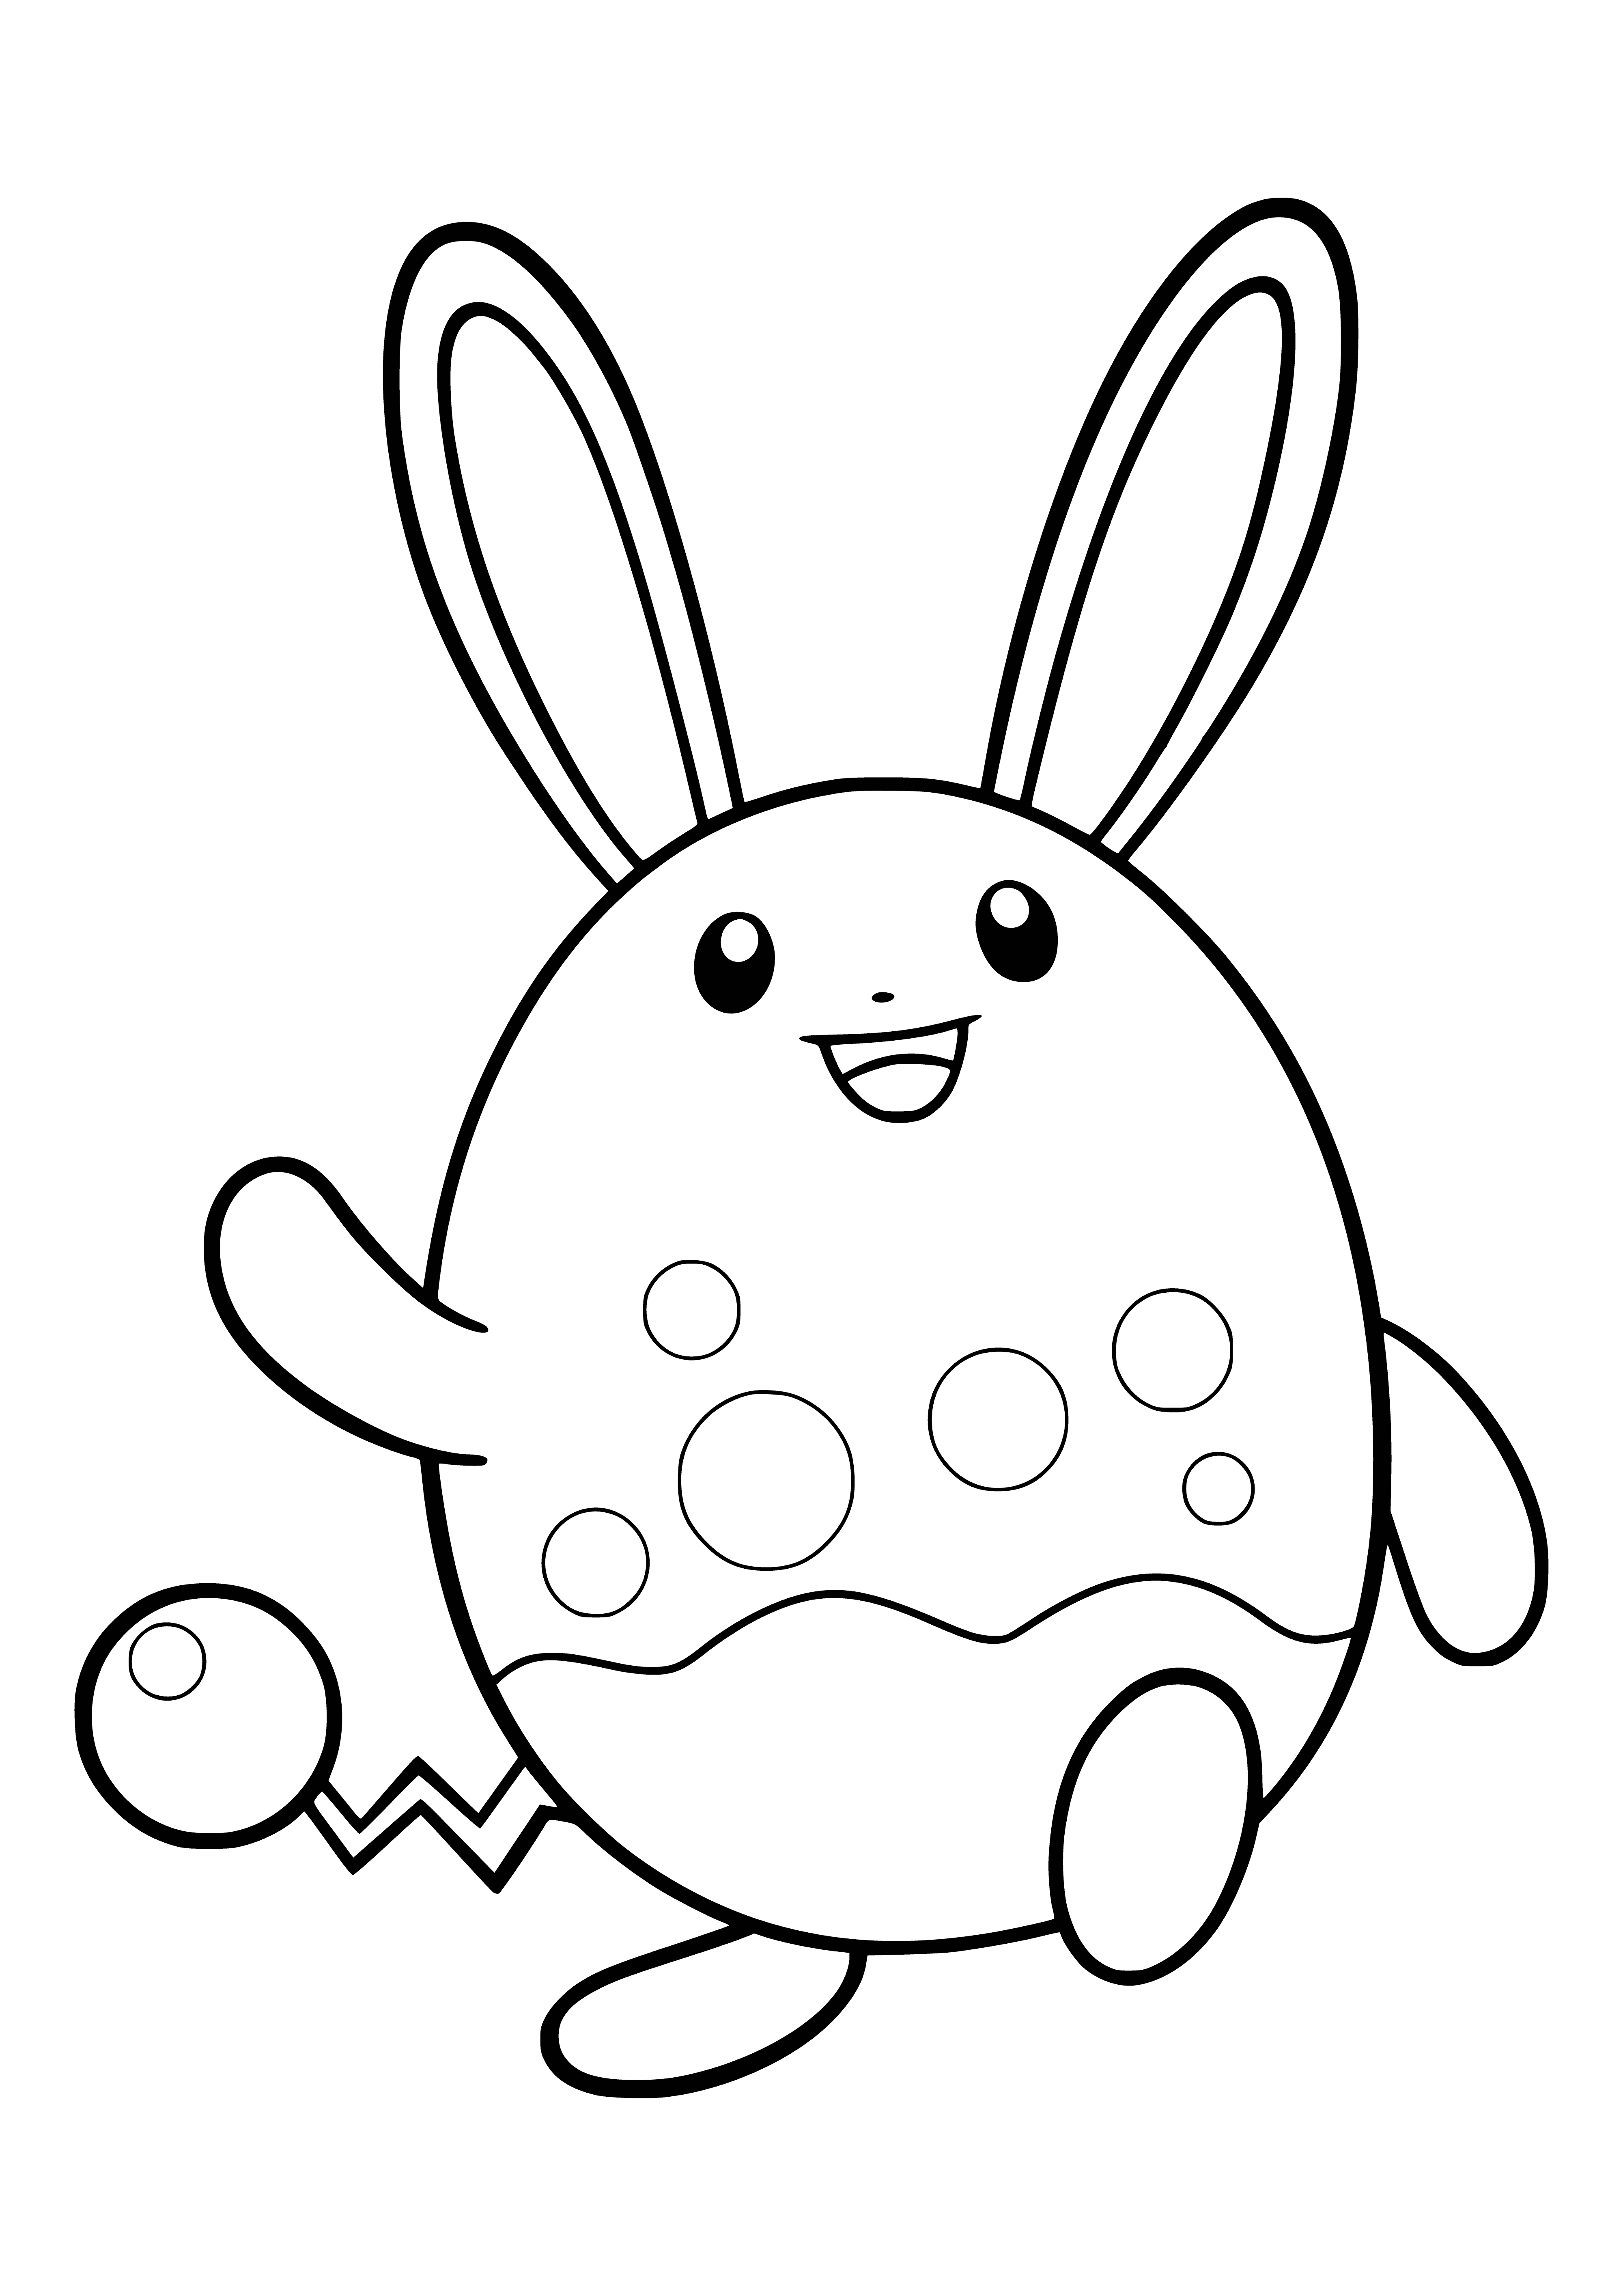 coloring page: Small blue Pokemon w/ white belly, large black ears, black tail w/white tip, & small black eyes.